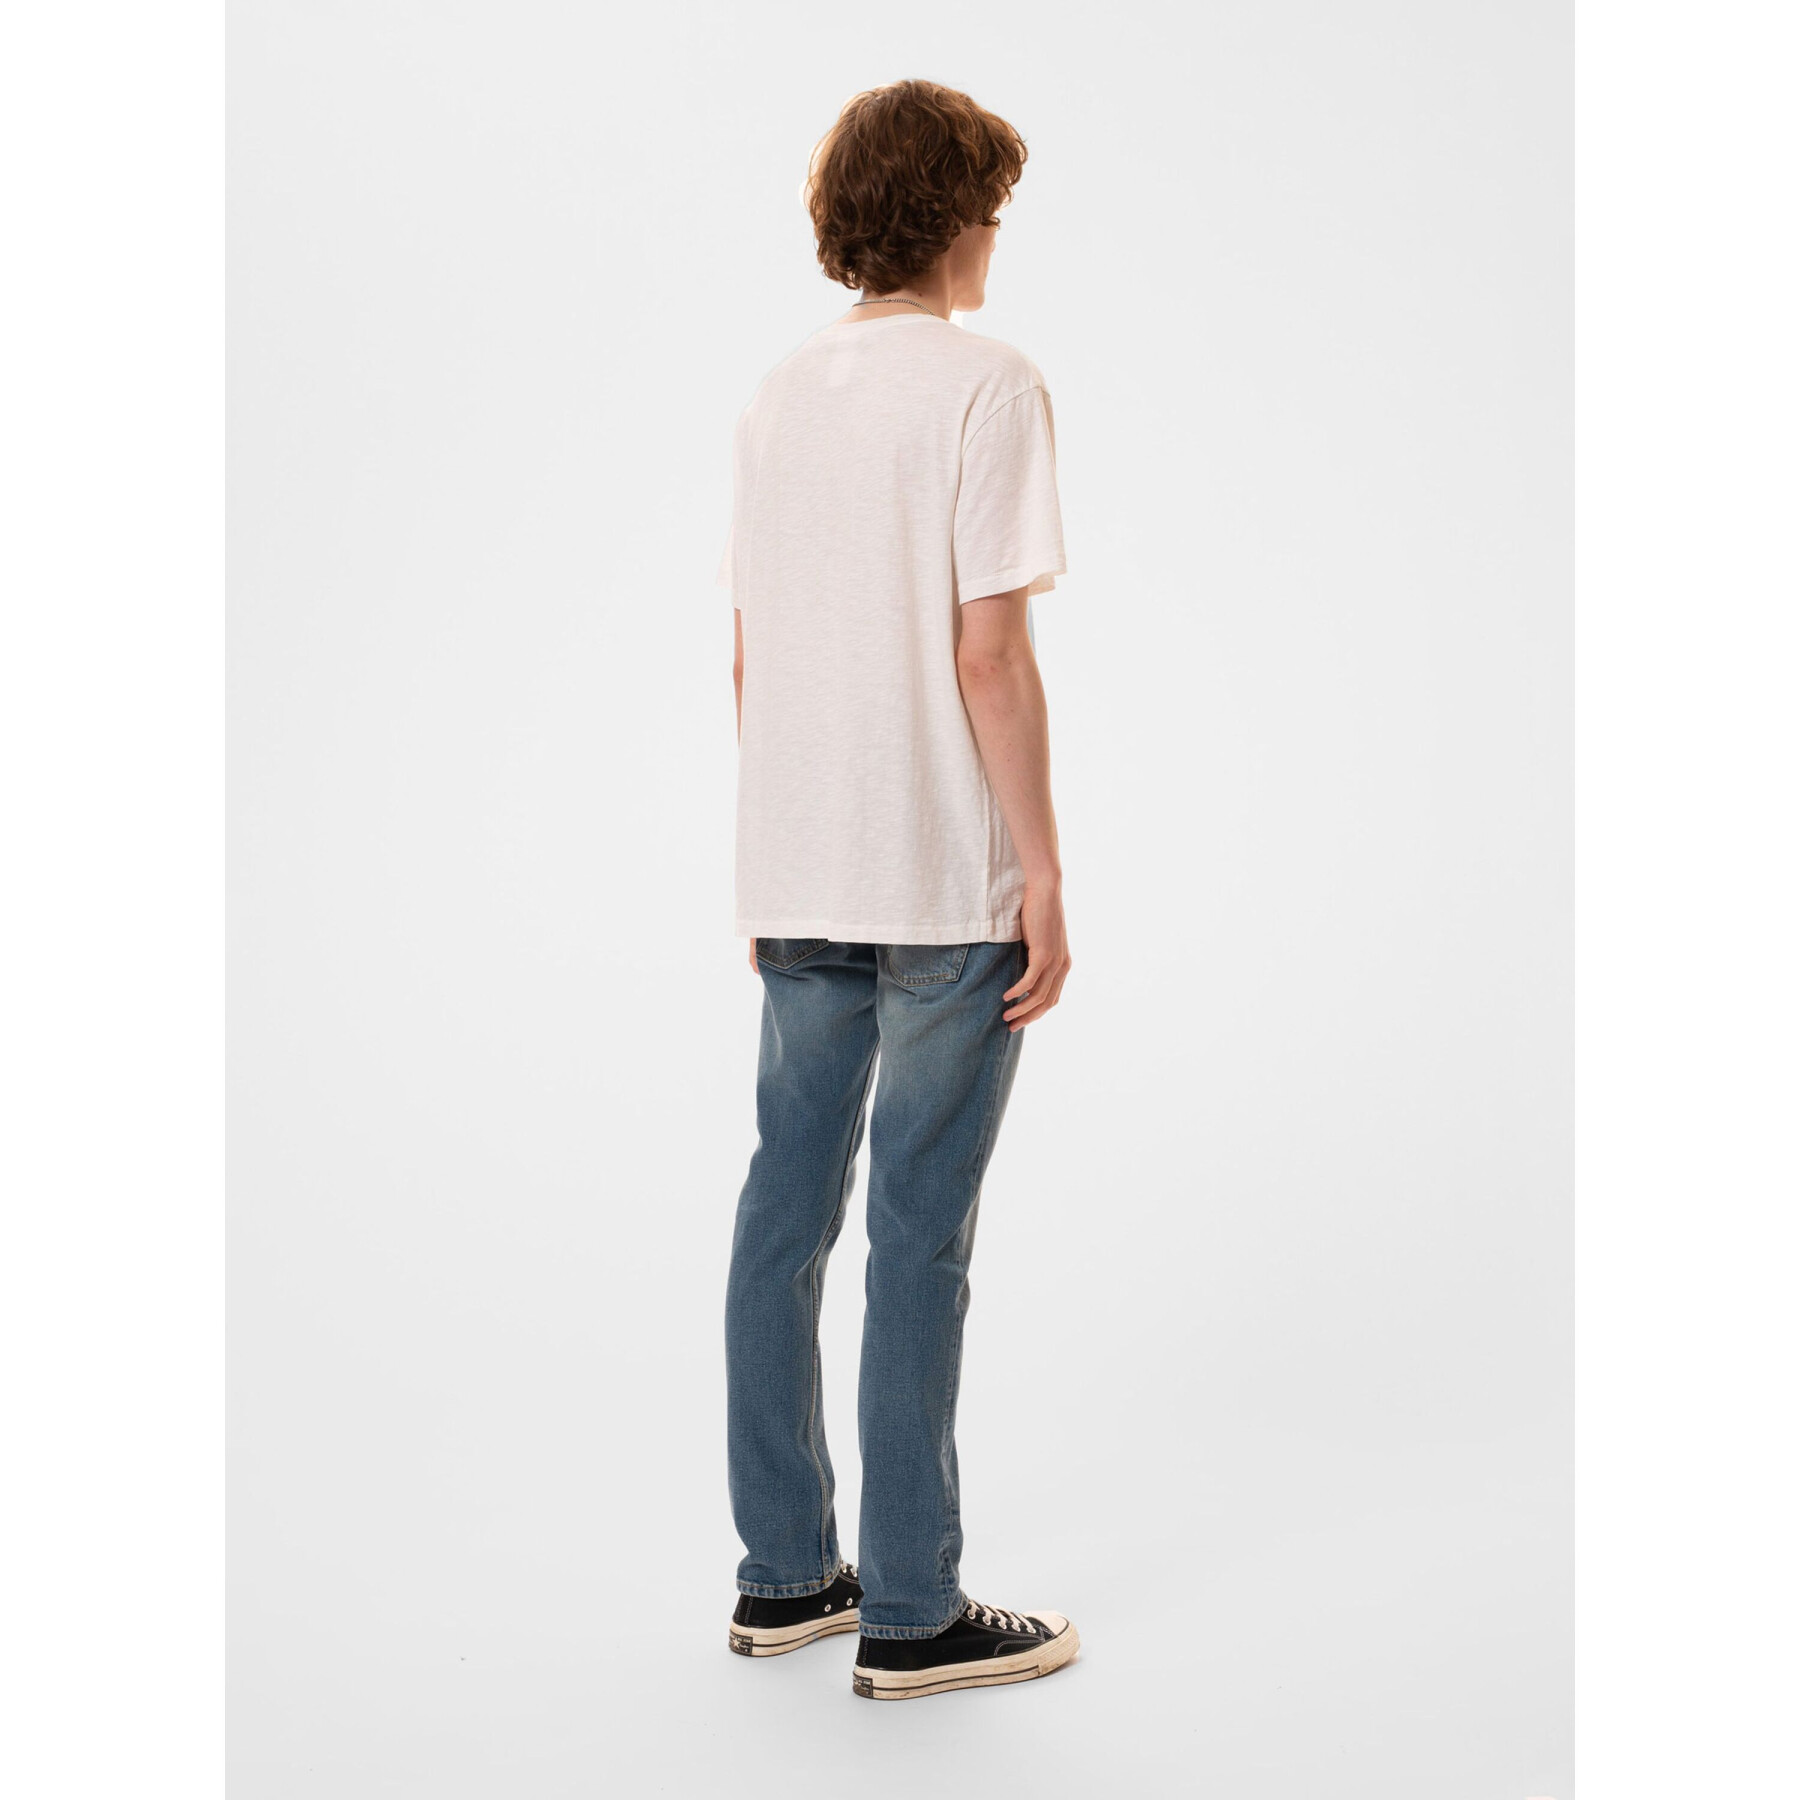 T-shirt Nudie Jeans Roffe